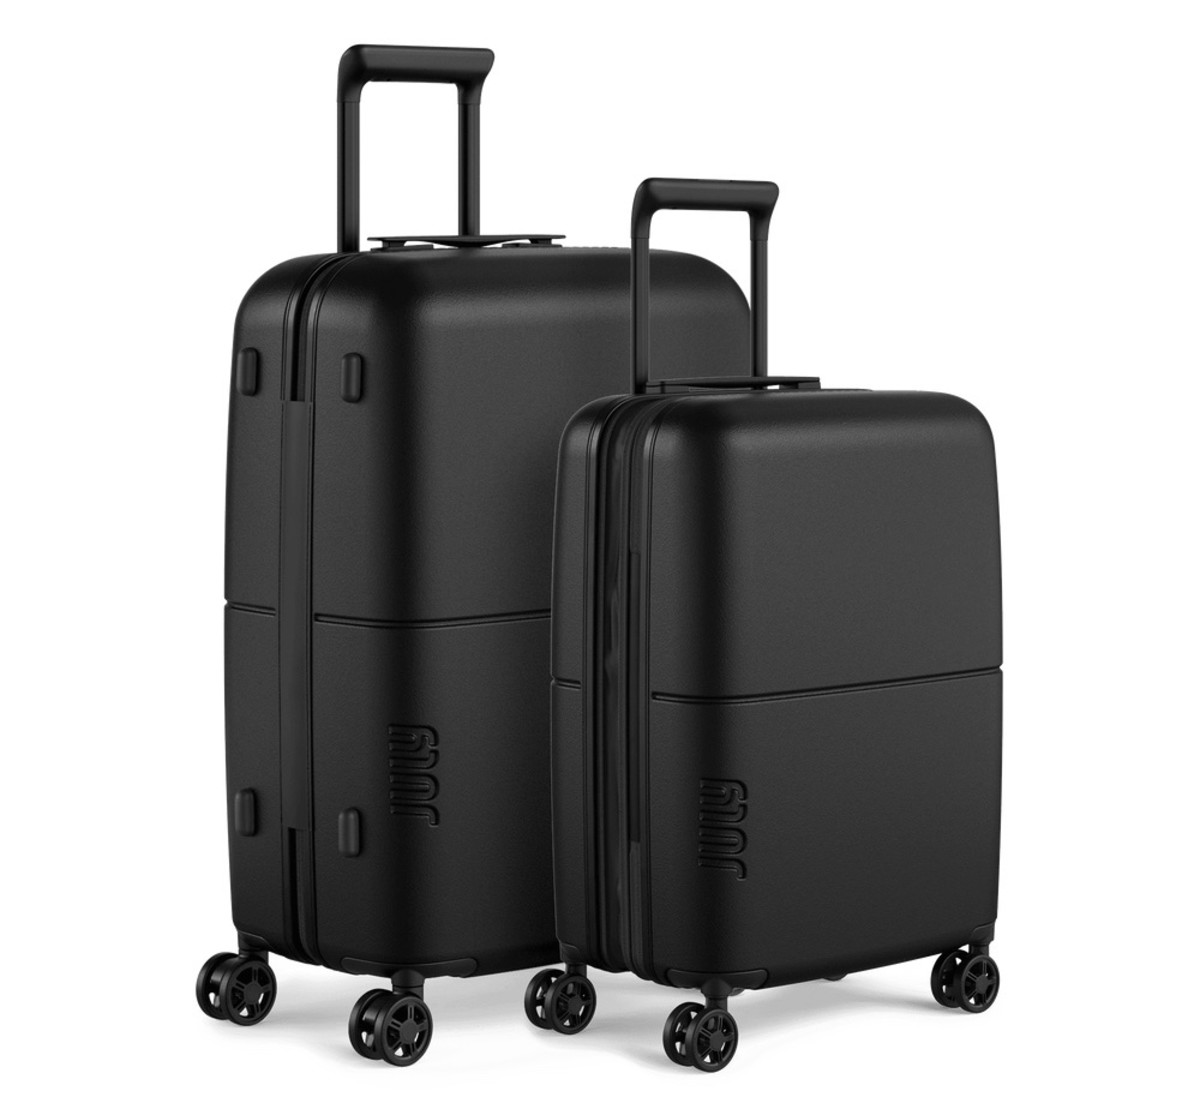 July expands its Light family with two new lightweight checked bag ...